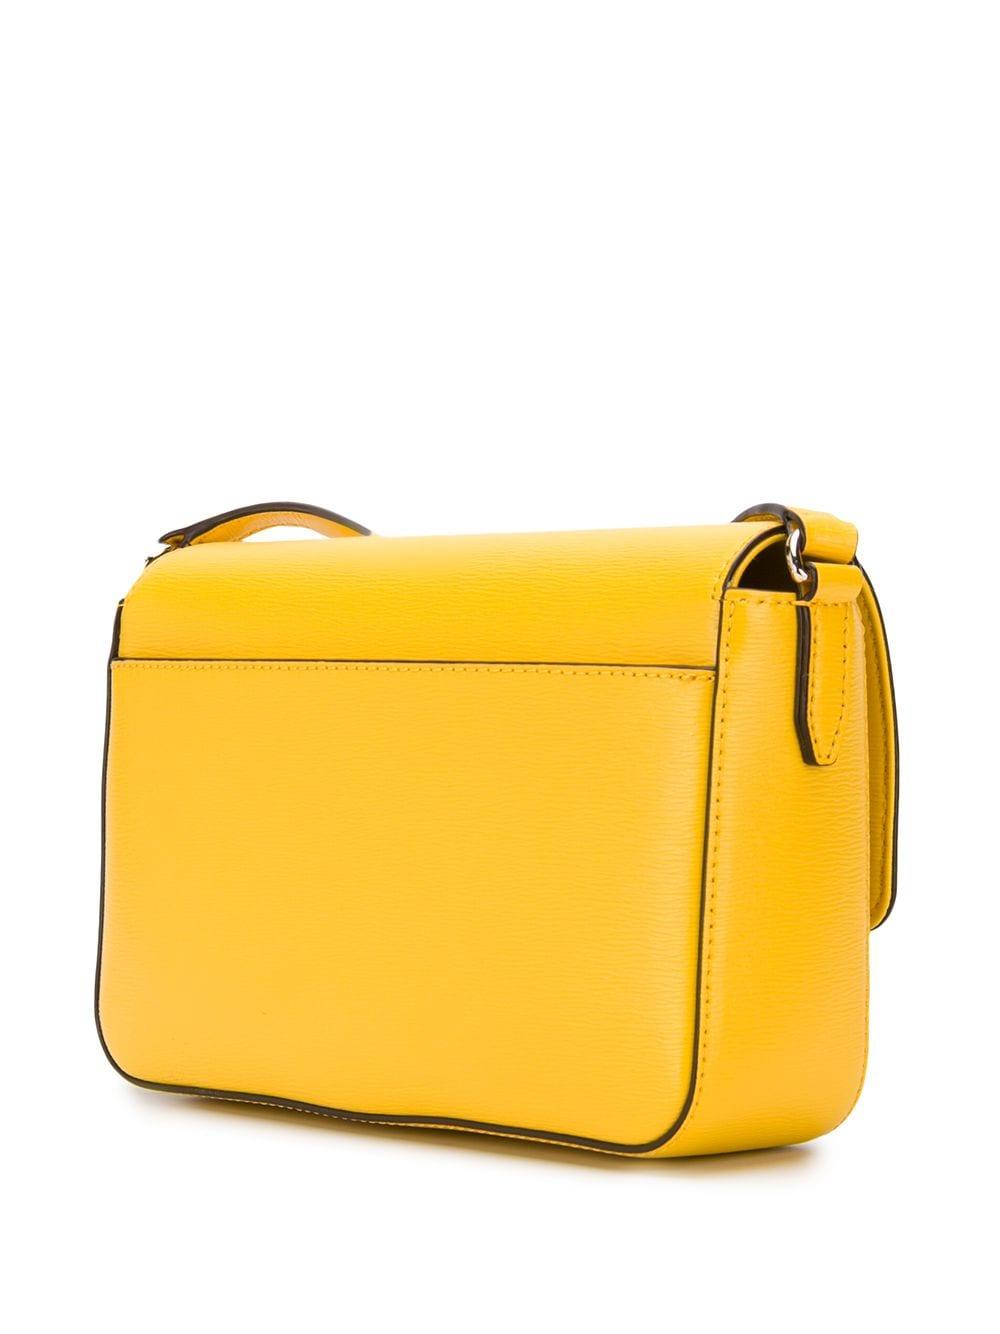 DKNY Bryant Leather Crossbody Bag in Yellow